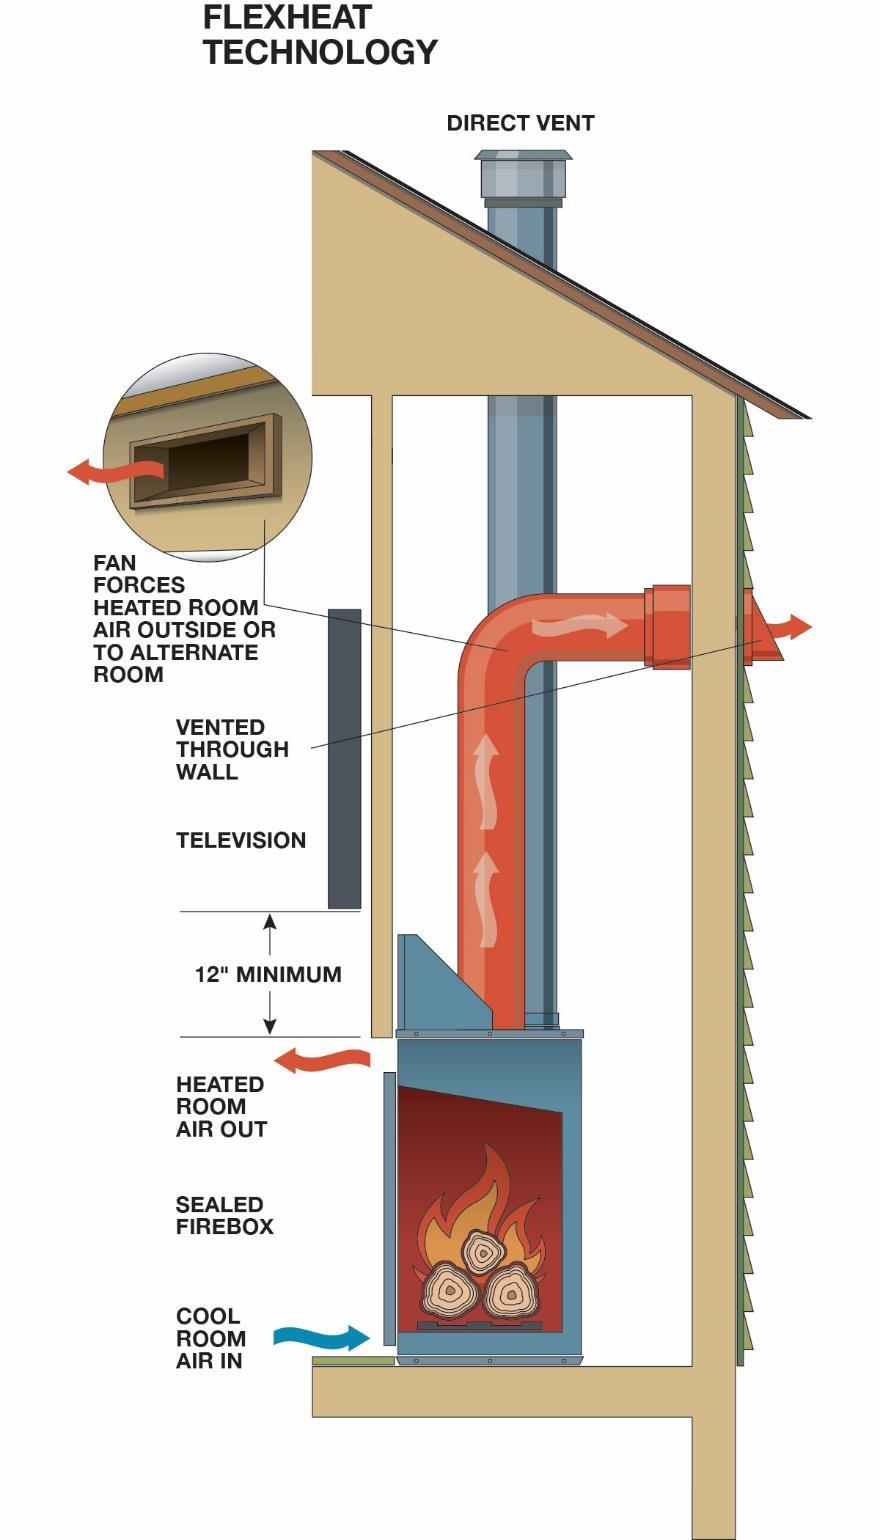 3.2.1.3.3 FlexHeat The FlexHeat system uses two inline fans to redirect heat from the fireplace outside the home or to an alternate room in the home.